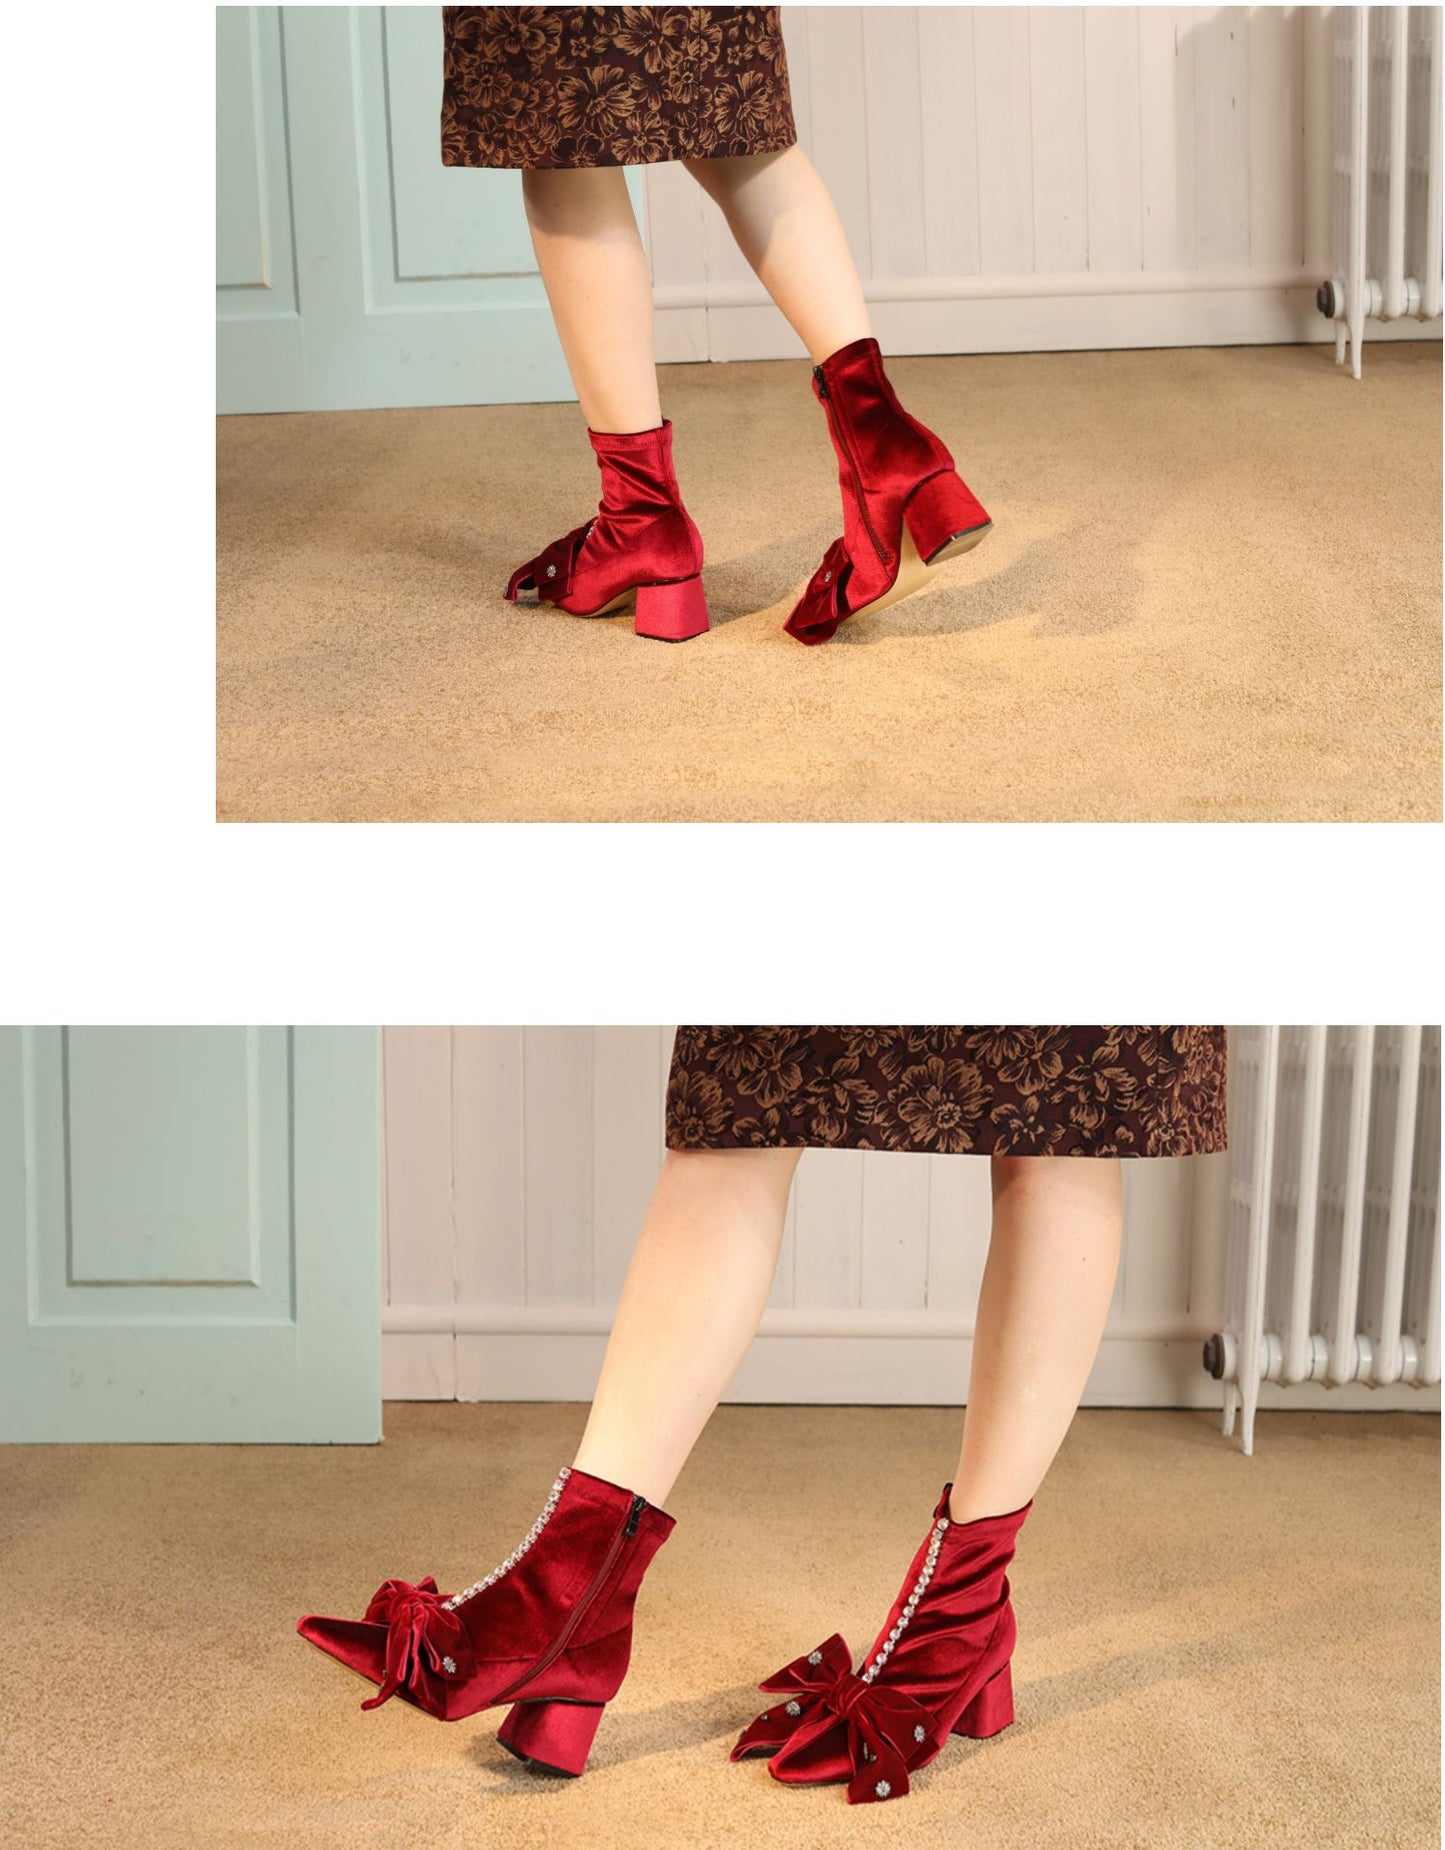 FEIFEI original design short boots elastic boots wine red bow ankle boots- Veronica